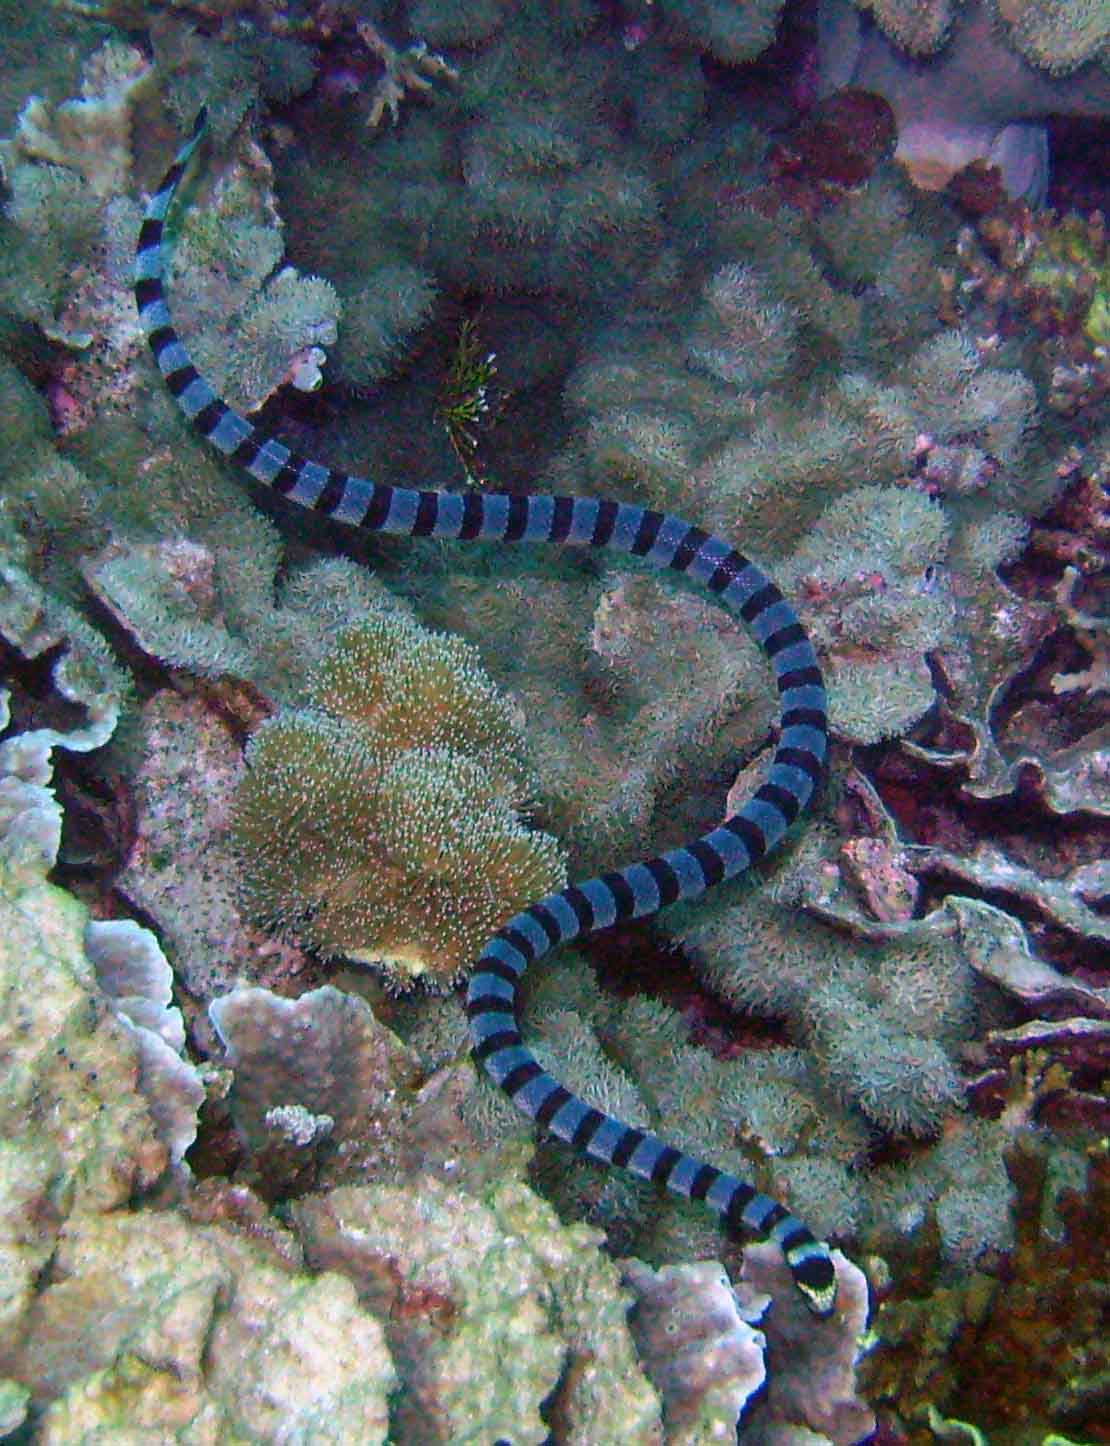 What kind of predators does a sea snake have?